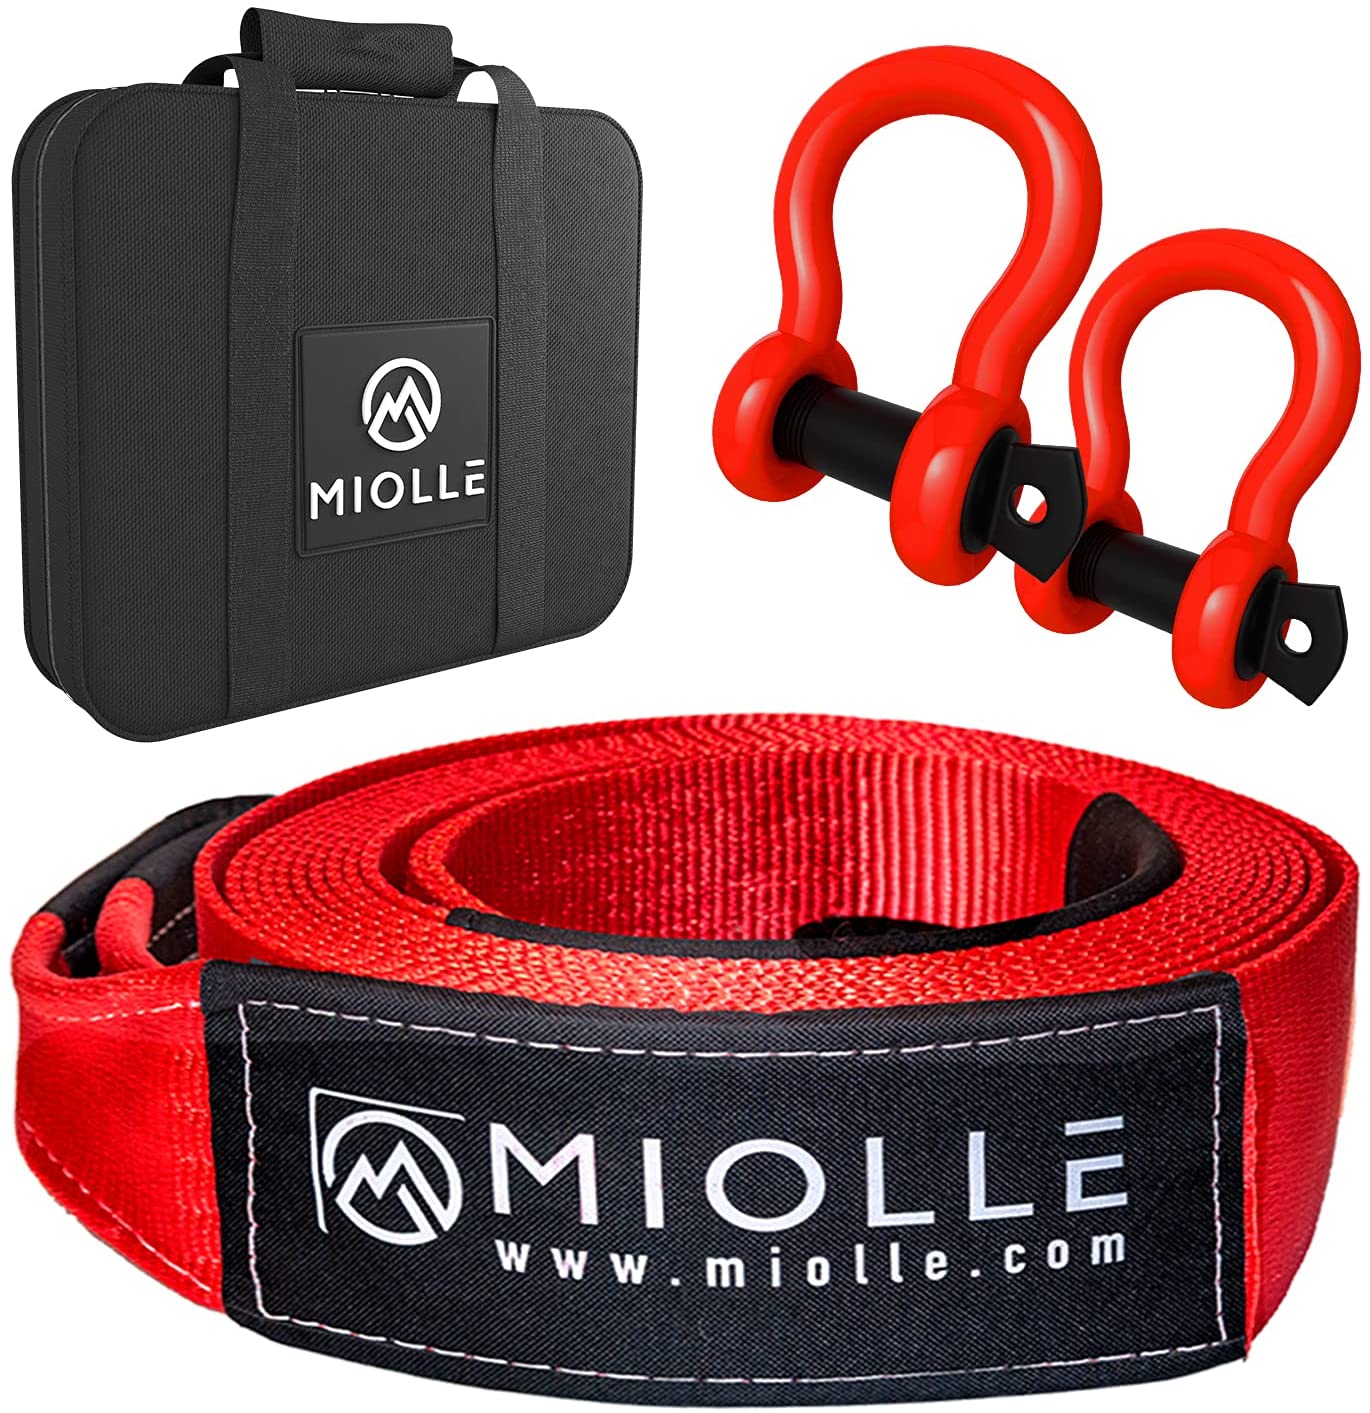 Tow Strap 2”x20’ (20990lb) With Loops and D-Hook Shackles